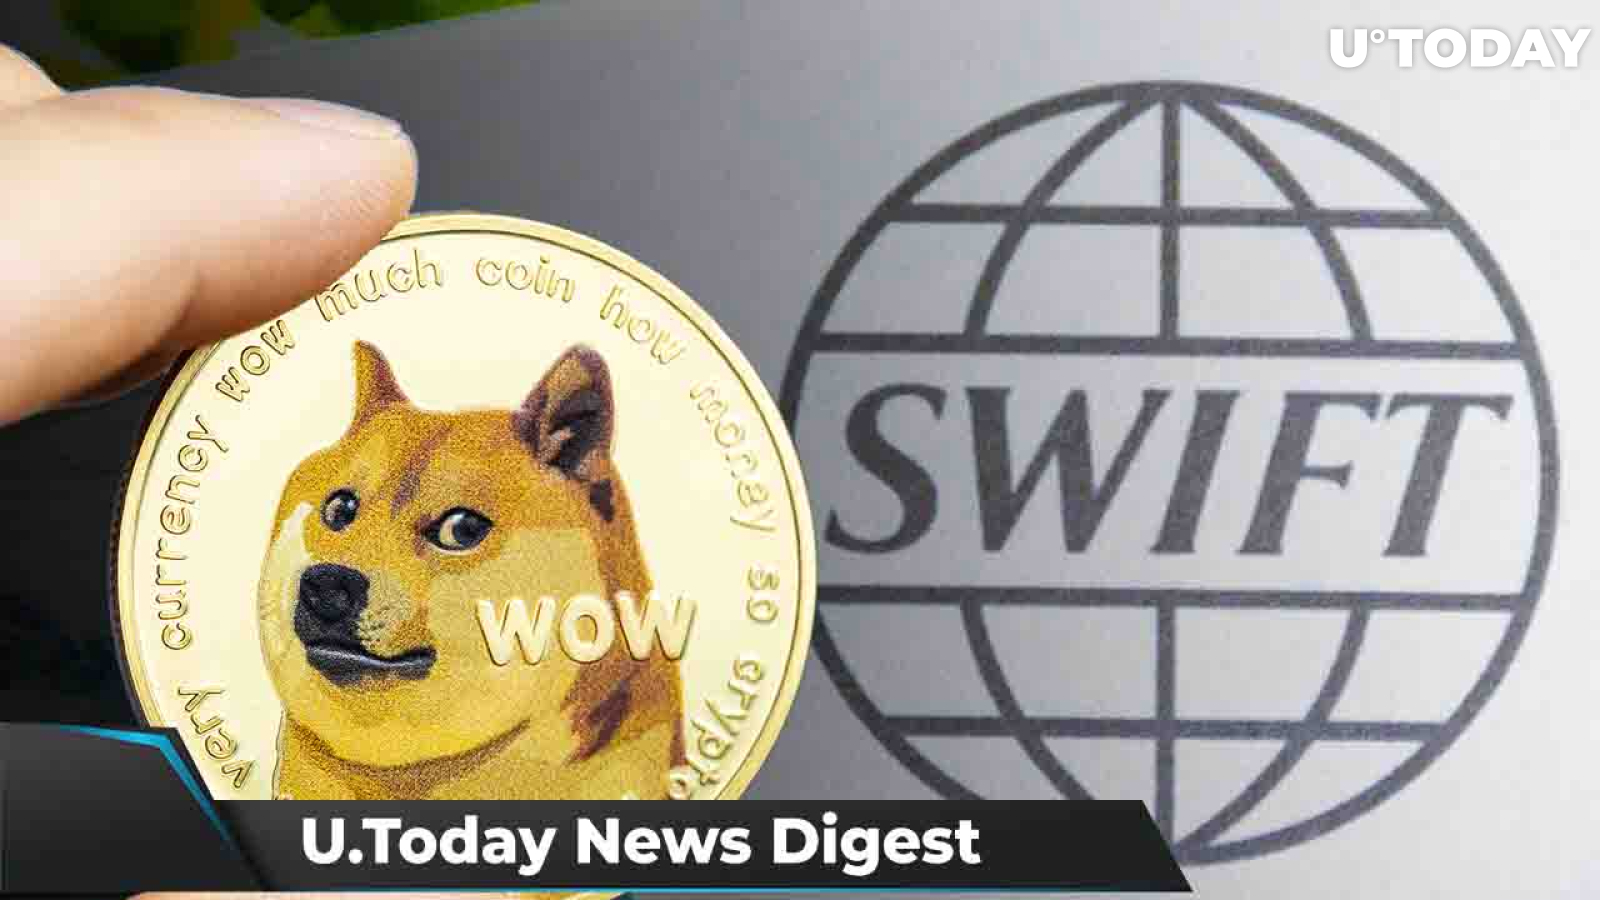 RippleNet Listed as Alternative to SWIFT, Elon Musk’s Tweet Carries DOGE Message, Cardano Ready to Surpass ETH’s Optimism: Crypto News Digest by U.Today